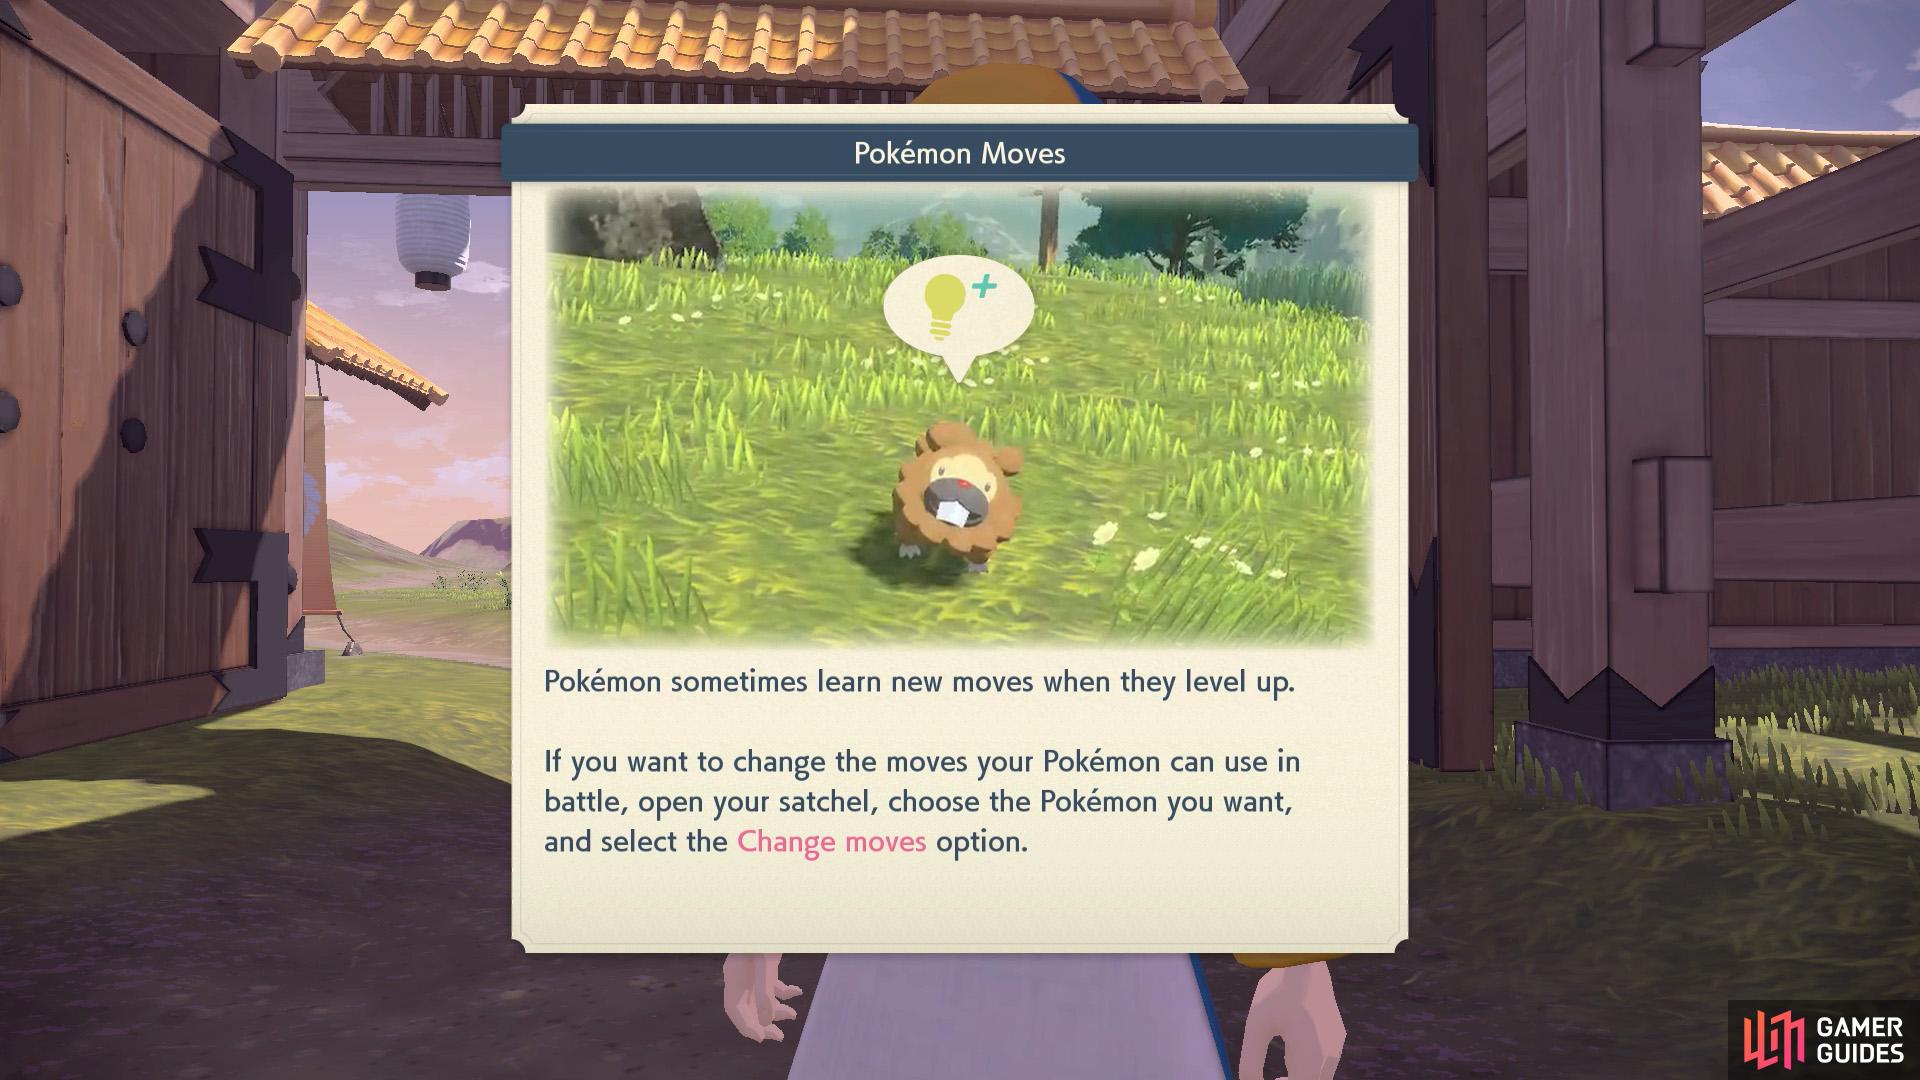 When a Pokémon learns a new move, it'll be added to its move list, which you can access via "Change Moves".